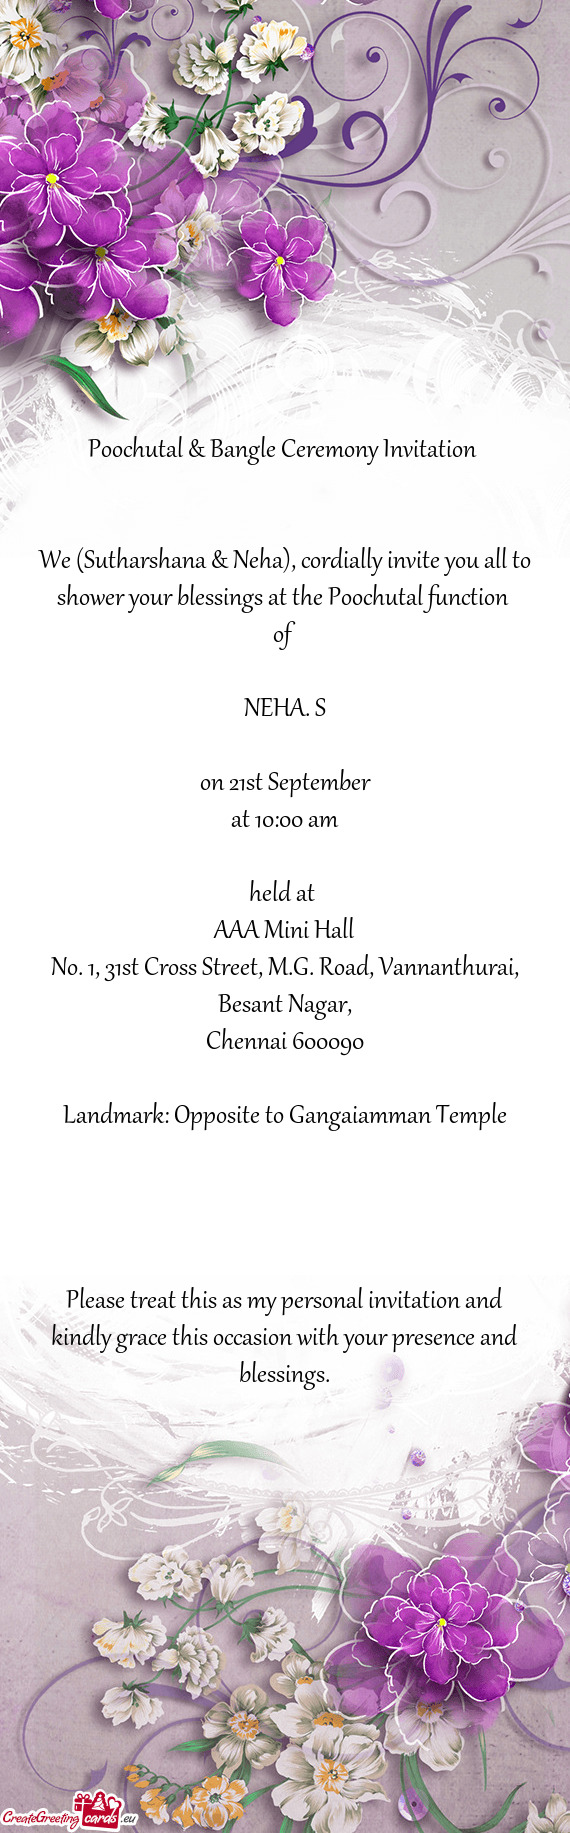 We (Sutharshana & Neha), cordially invite you all to shower your blessings at the Poochutal function